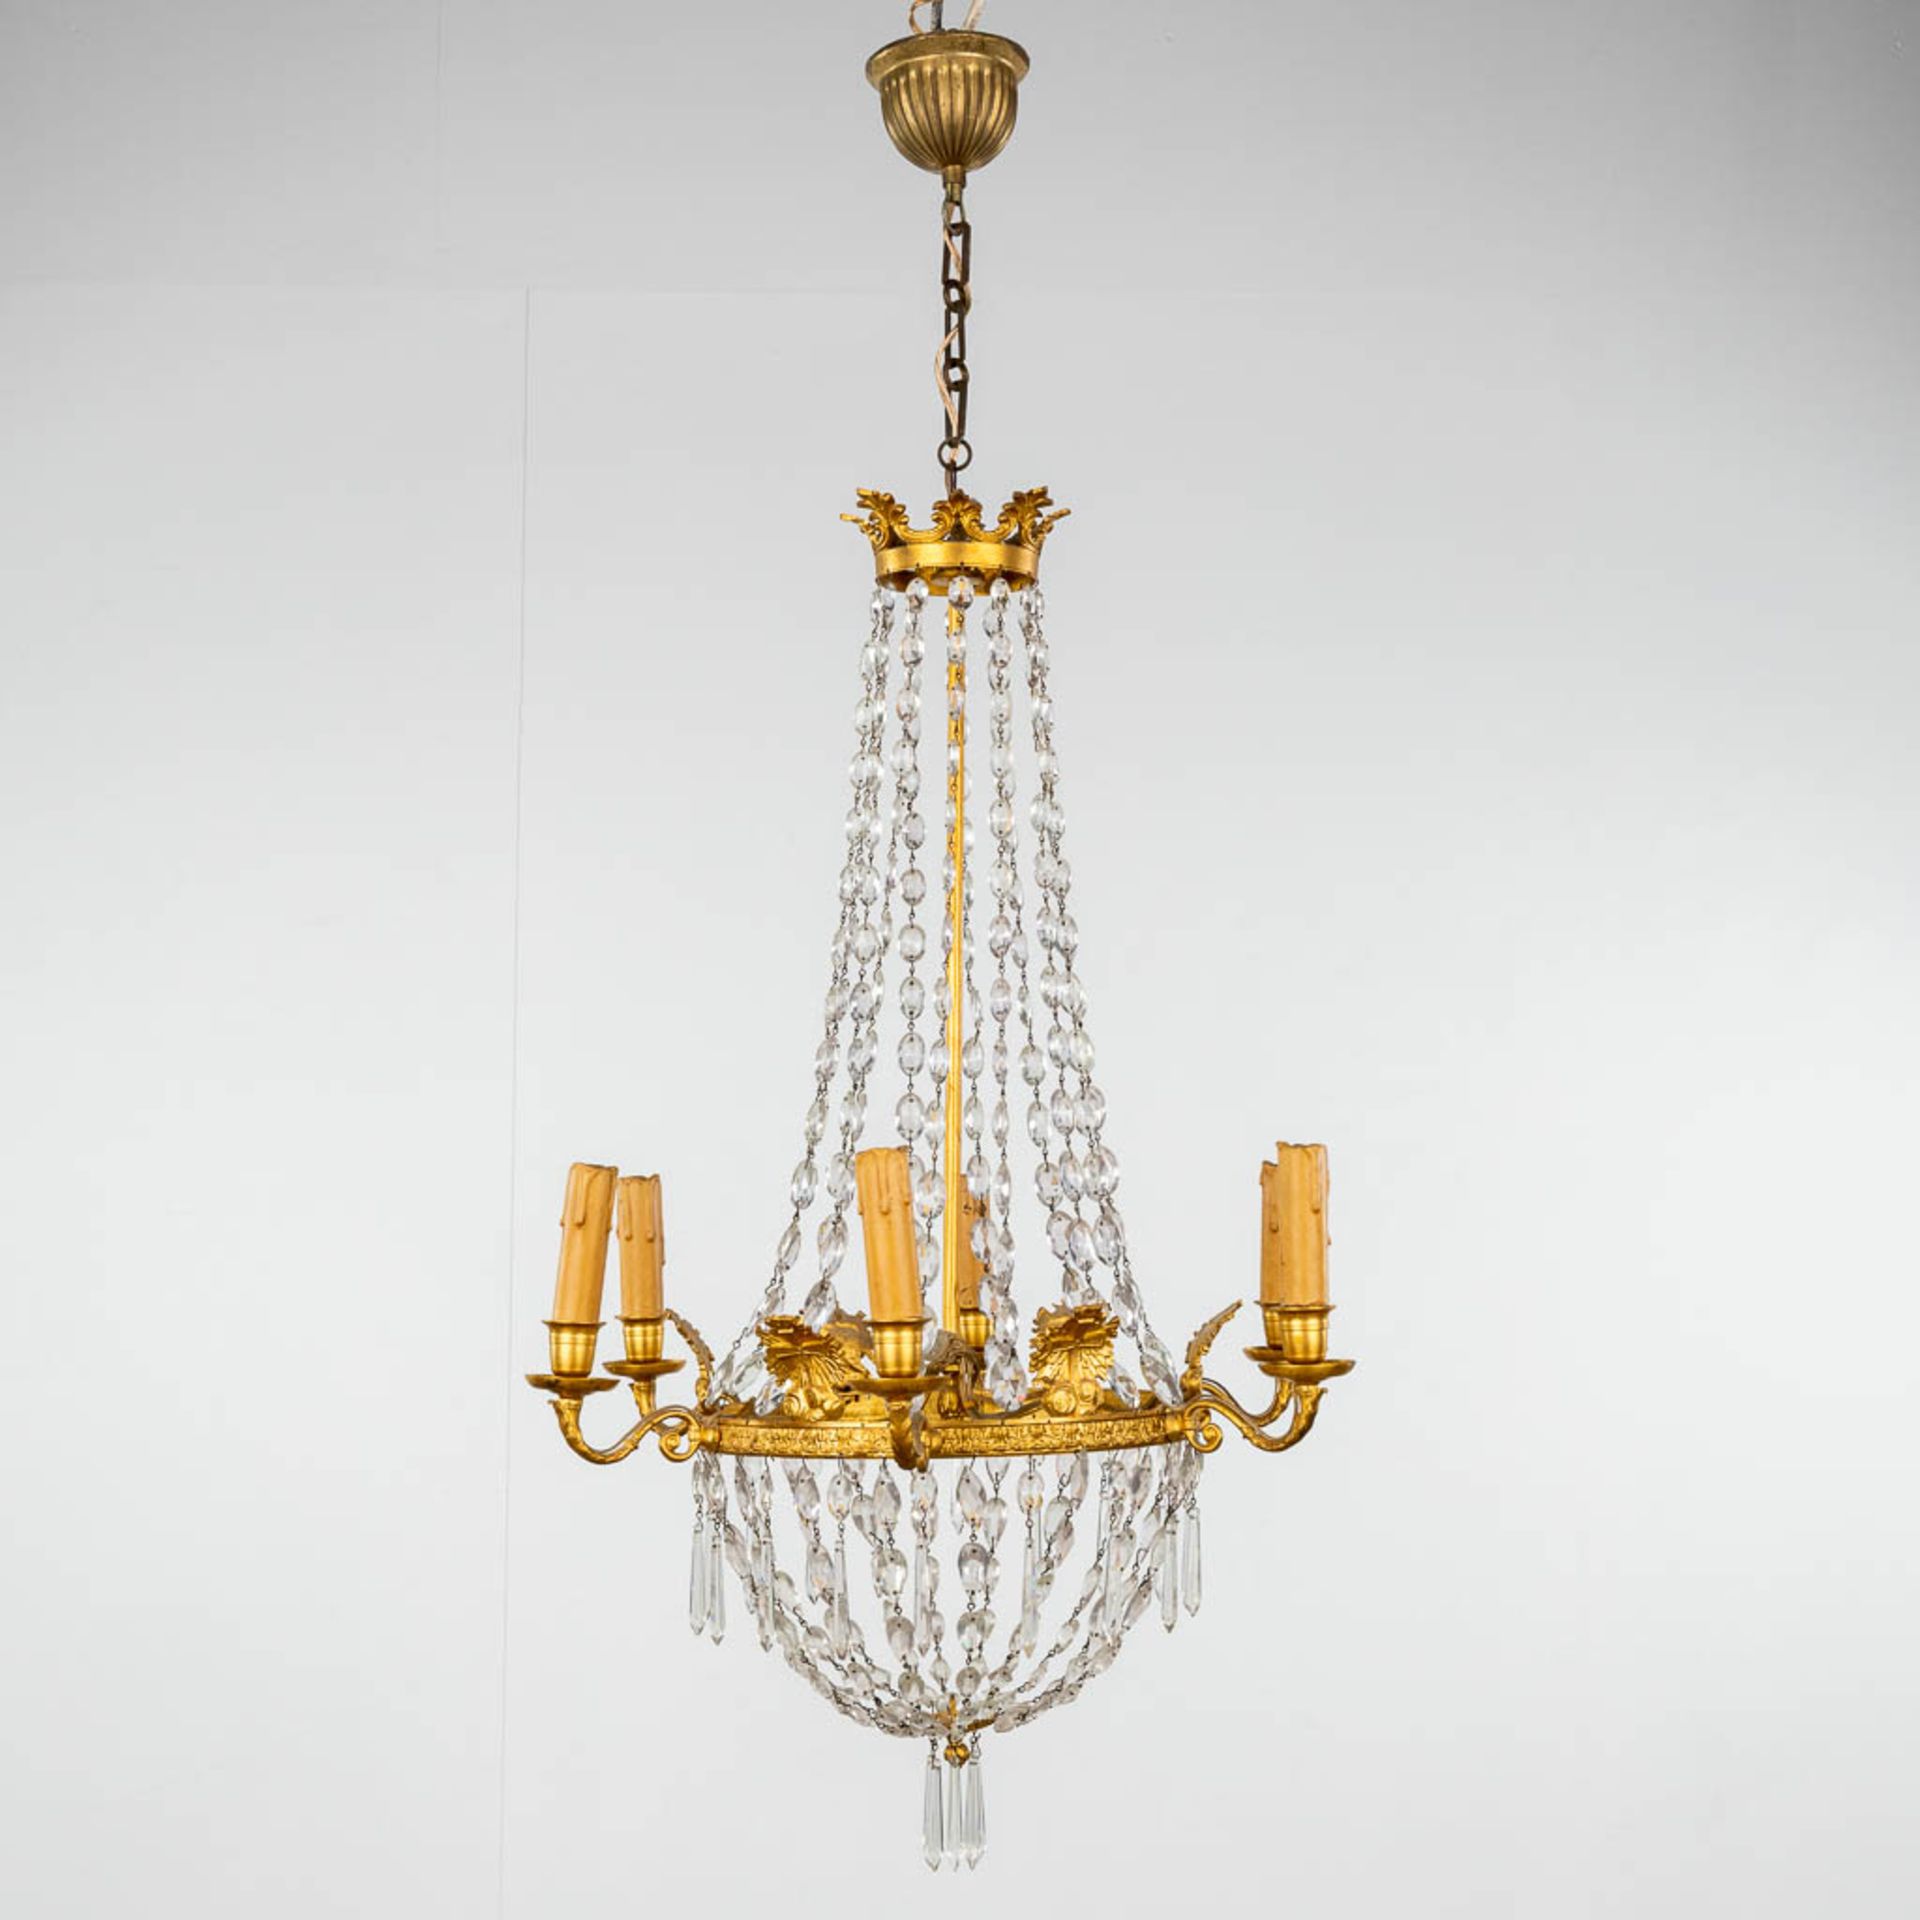 A chandelier 'Sac ˆ Perles', bronze and glass in empire style. 20th C. (H: 100 x D: 50 cm)